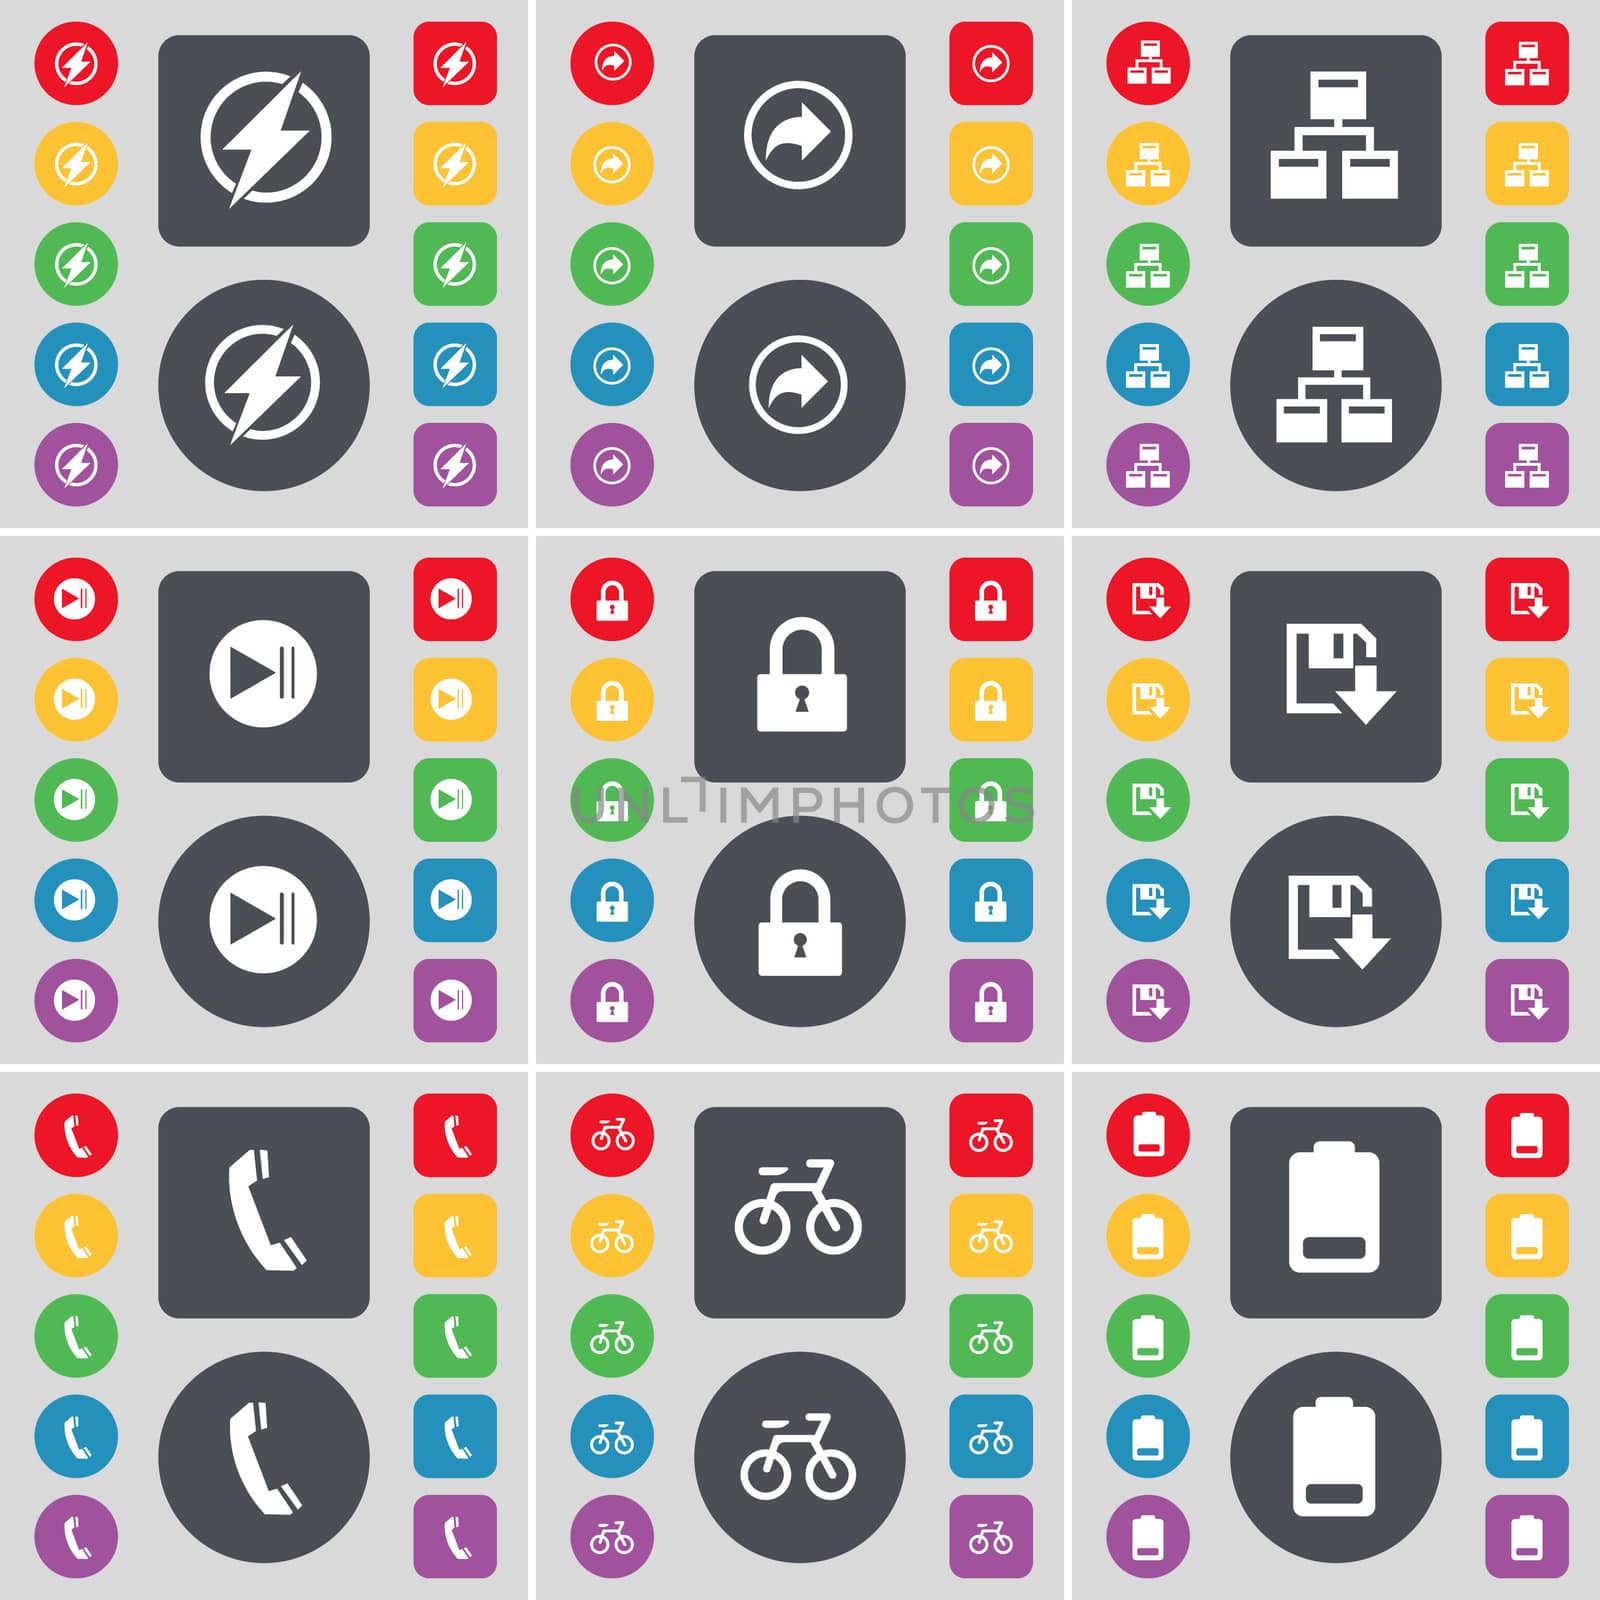 Flash, Back, Network, Media skip, Lock, Floppy, Receiver, Bicycling, Battery icon symbol. A large set of flat, colored buttons for your design.  by serhii_lohvyniuk